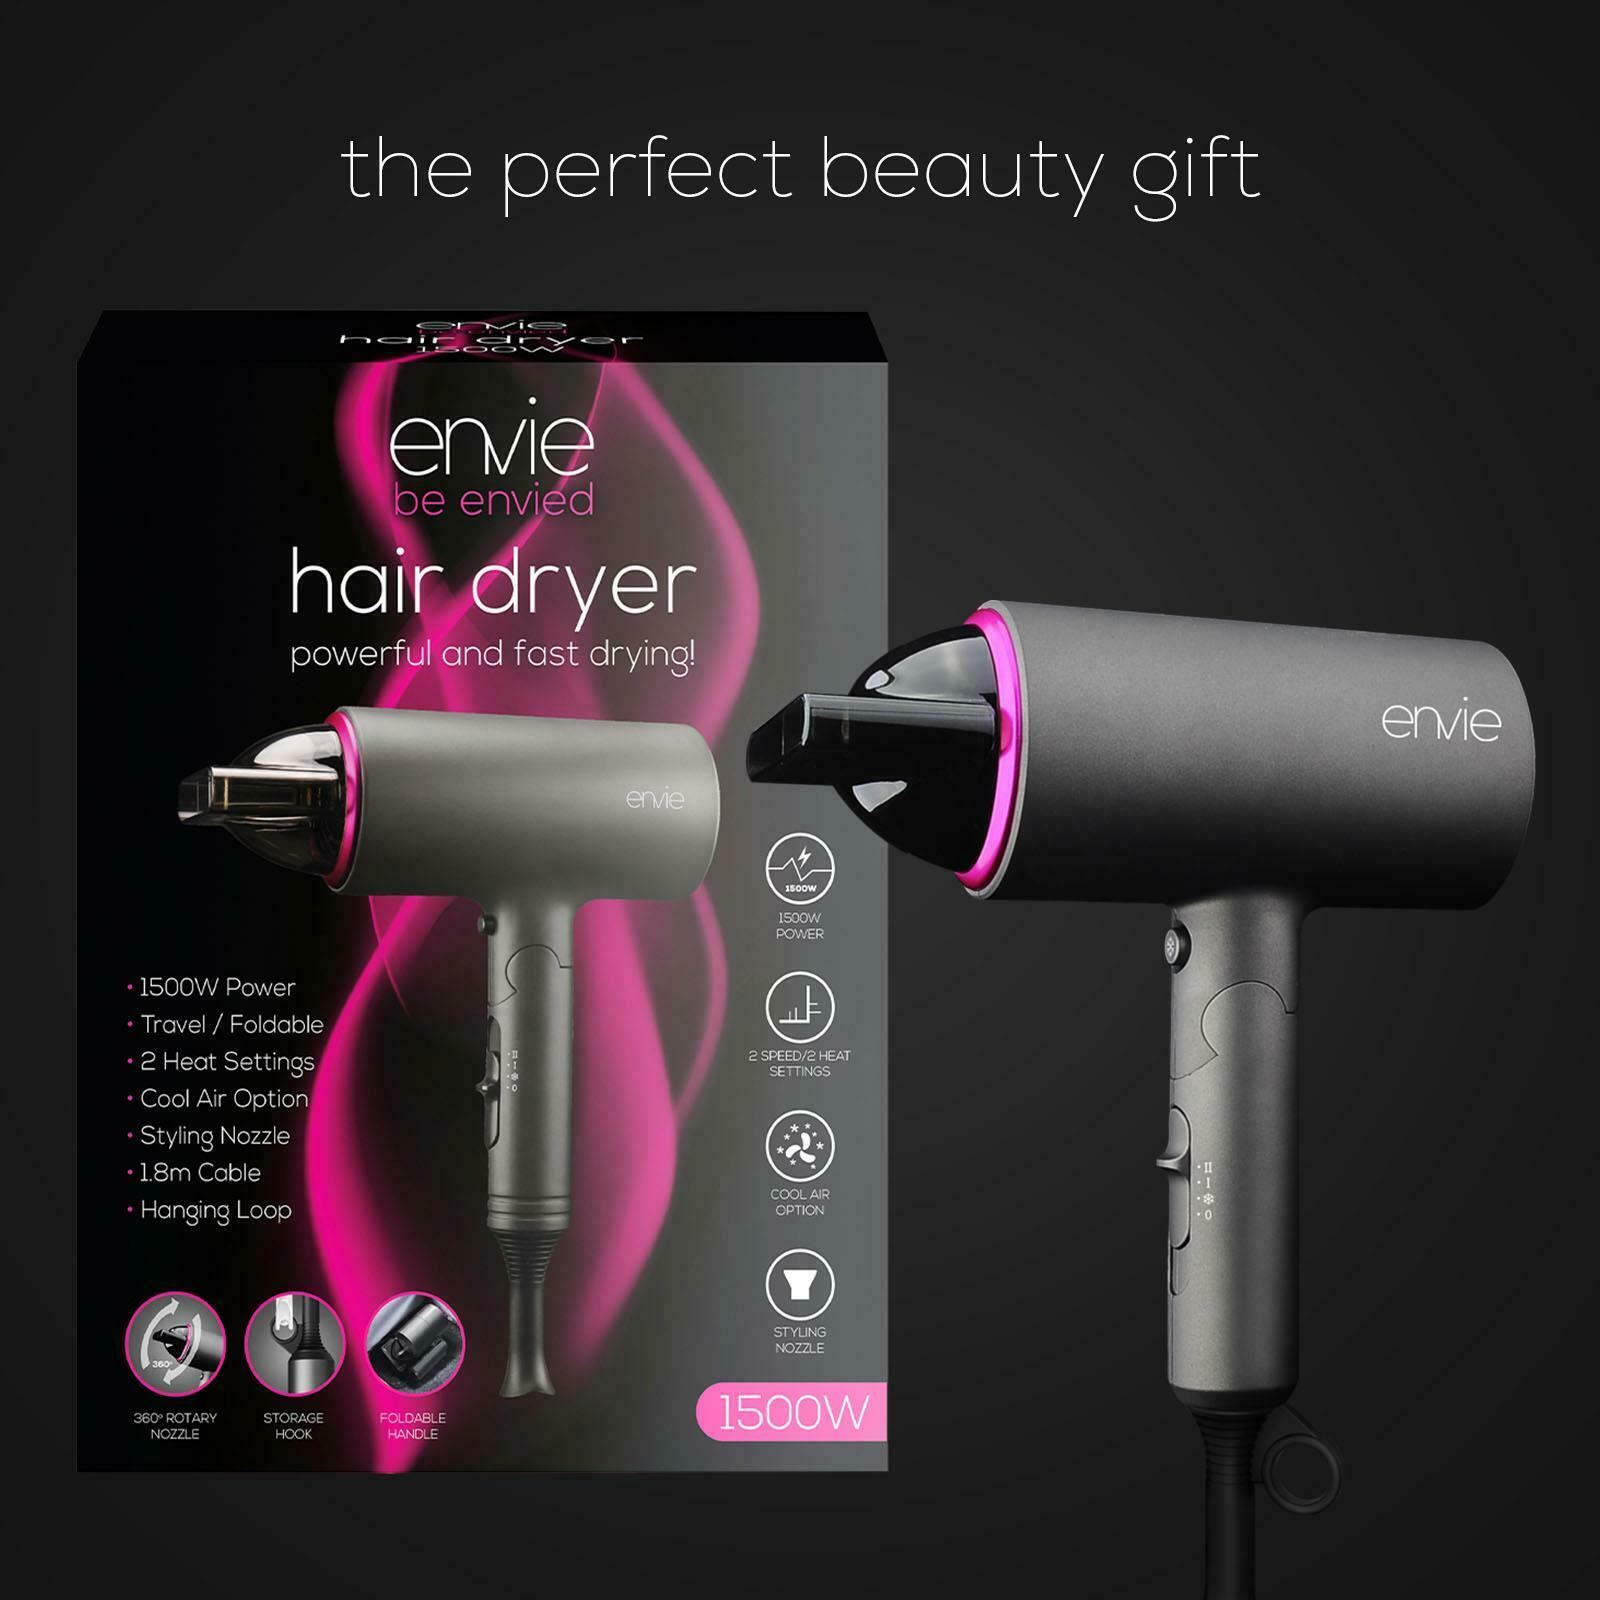 Envie Hair Dryer with Heat Setting & Lightweight Foldable Travel Handle, 1500W